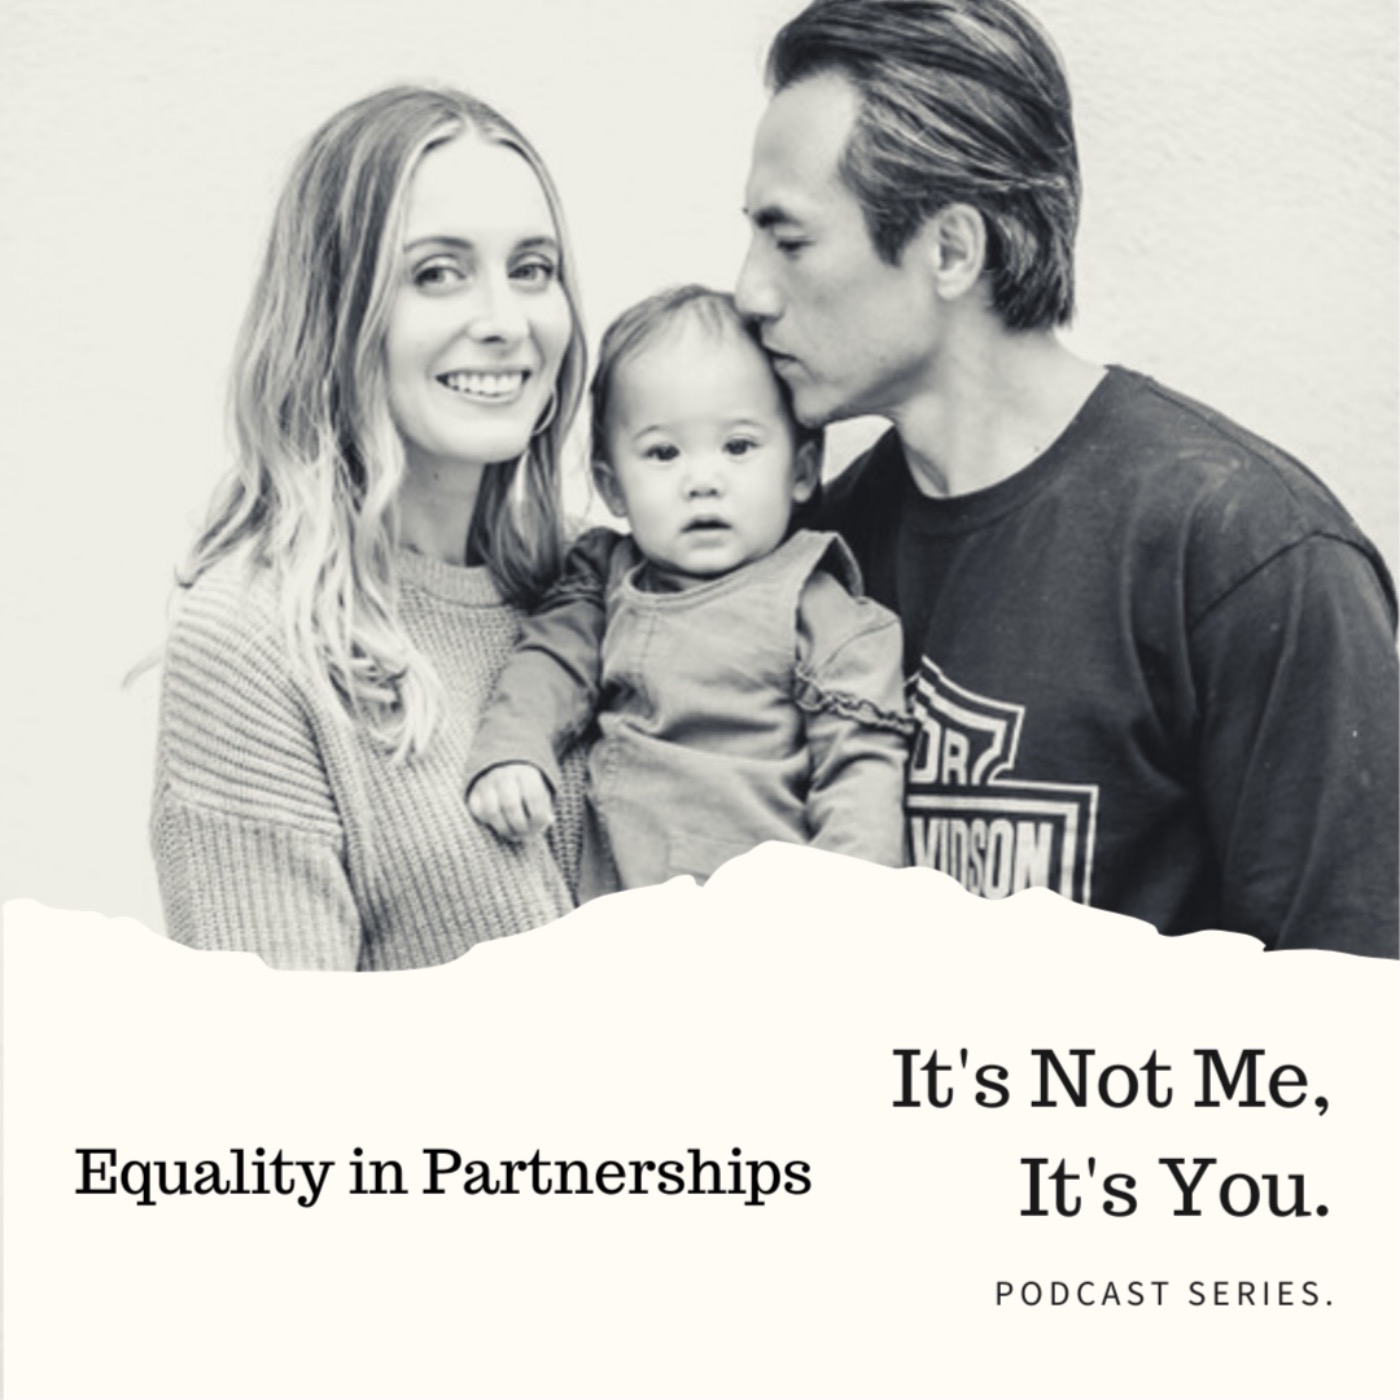 It's Not Me, It's You: Equality in Partnerships